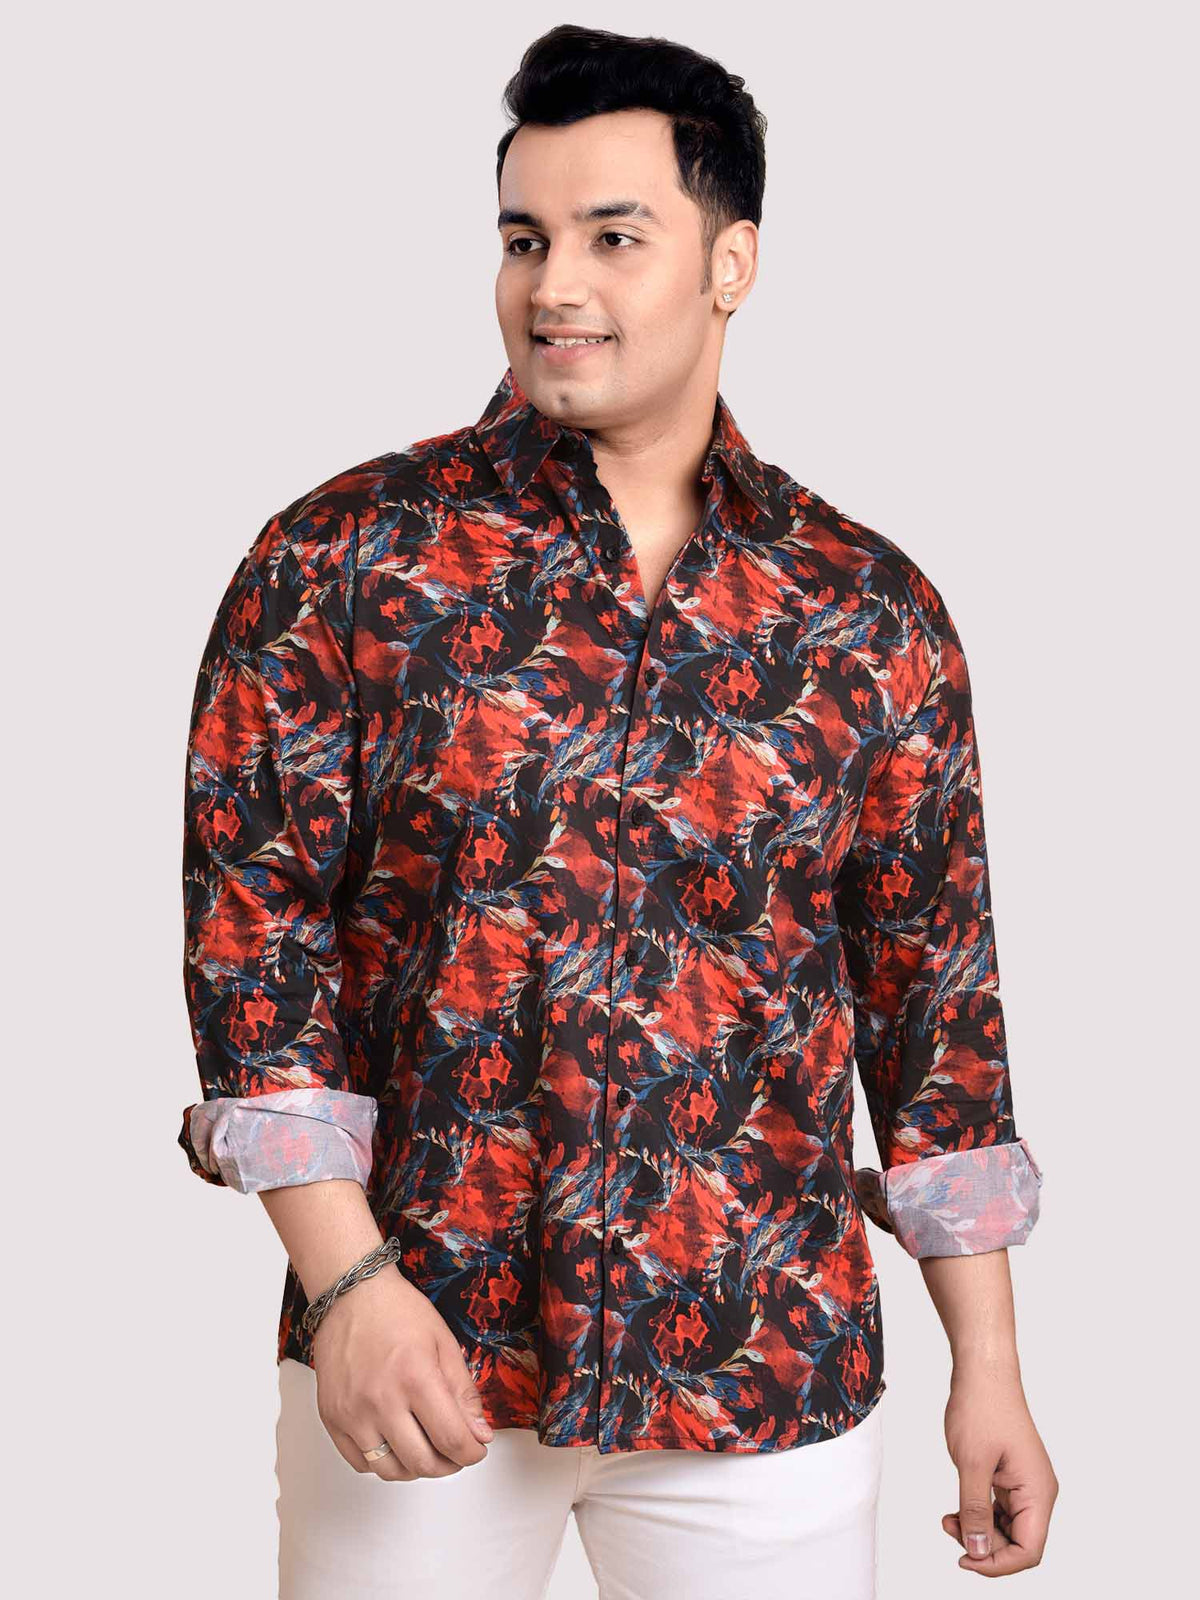 Red Current Printed Cotton Full sleeve Men's Plus size